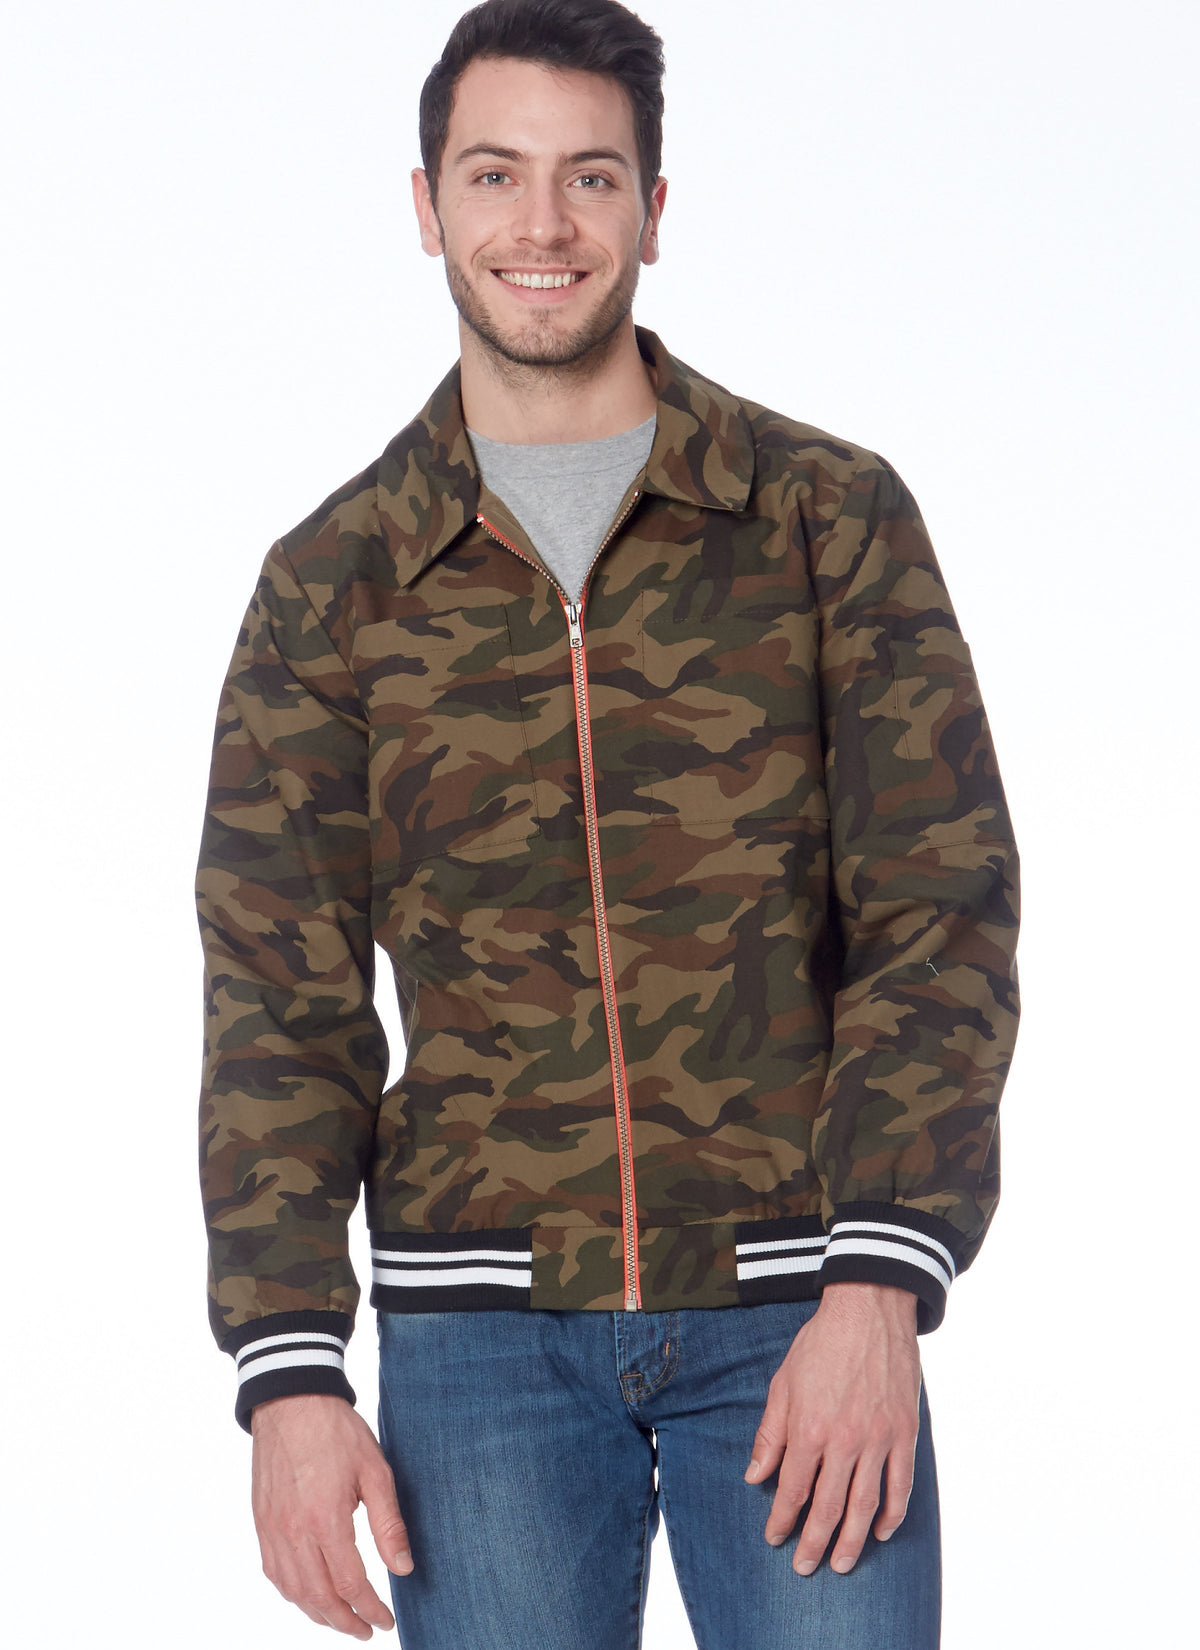 M7637 Misses' and Men's Bomber Jackets — jaycotts.co.uk - Sewing Supplies